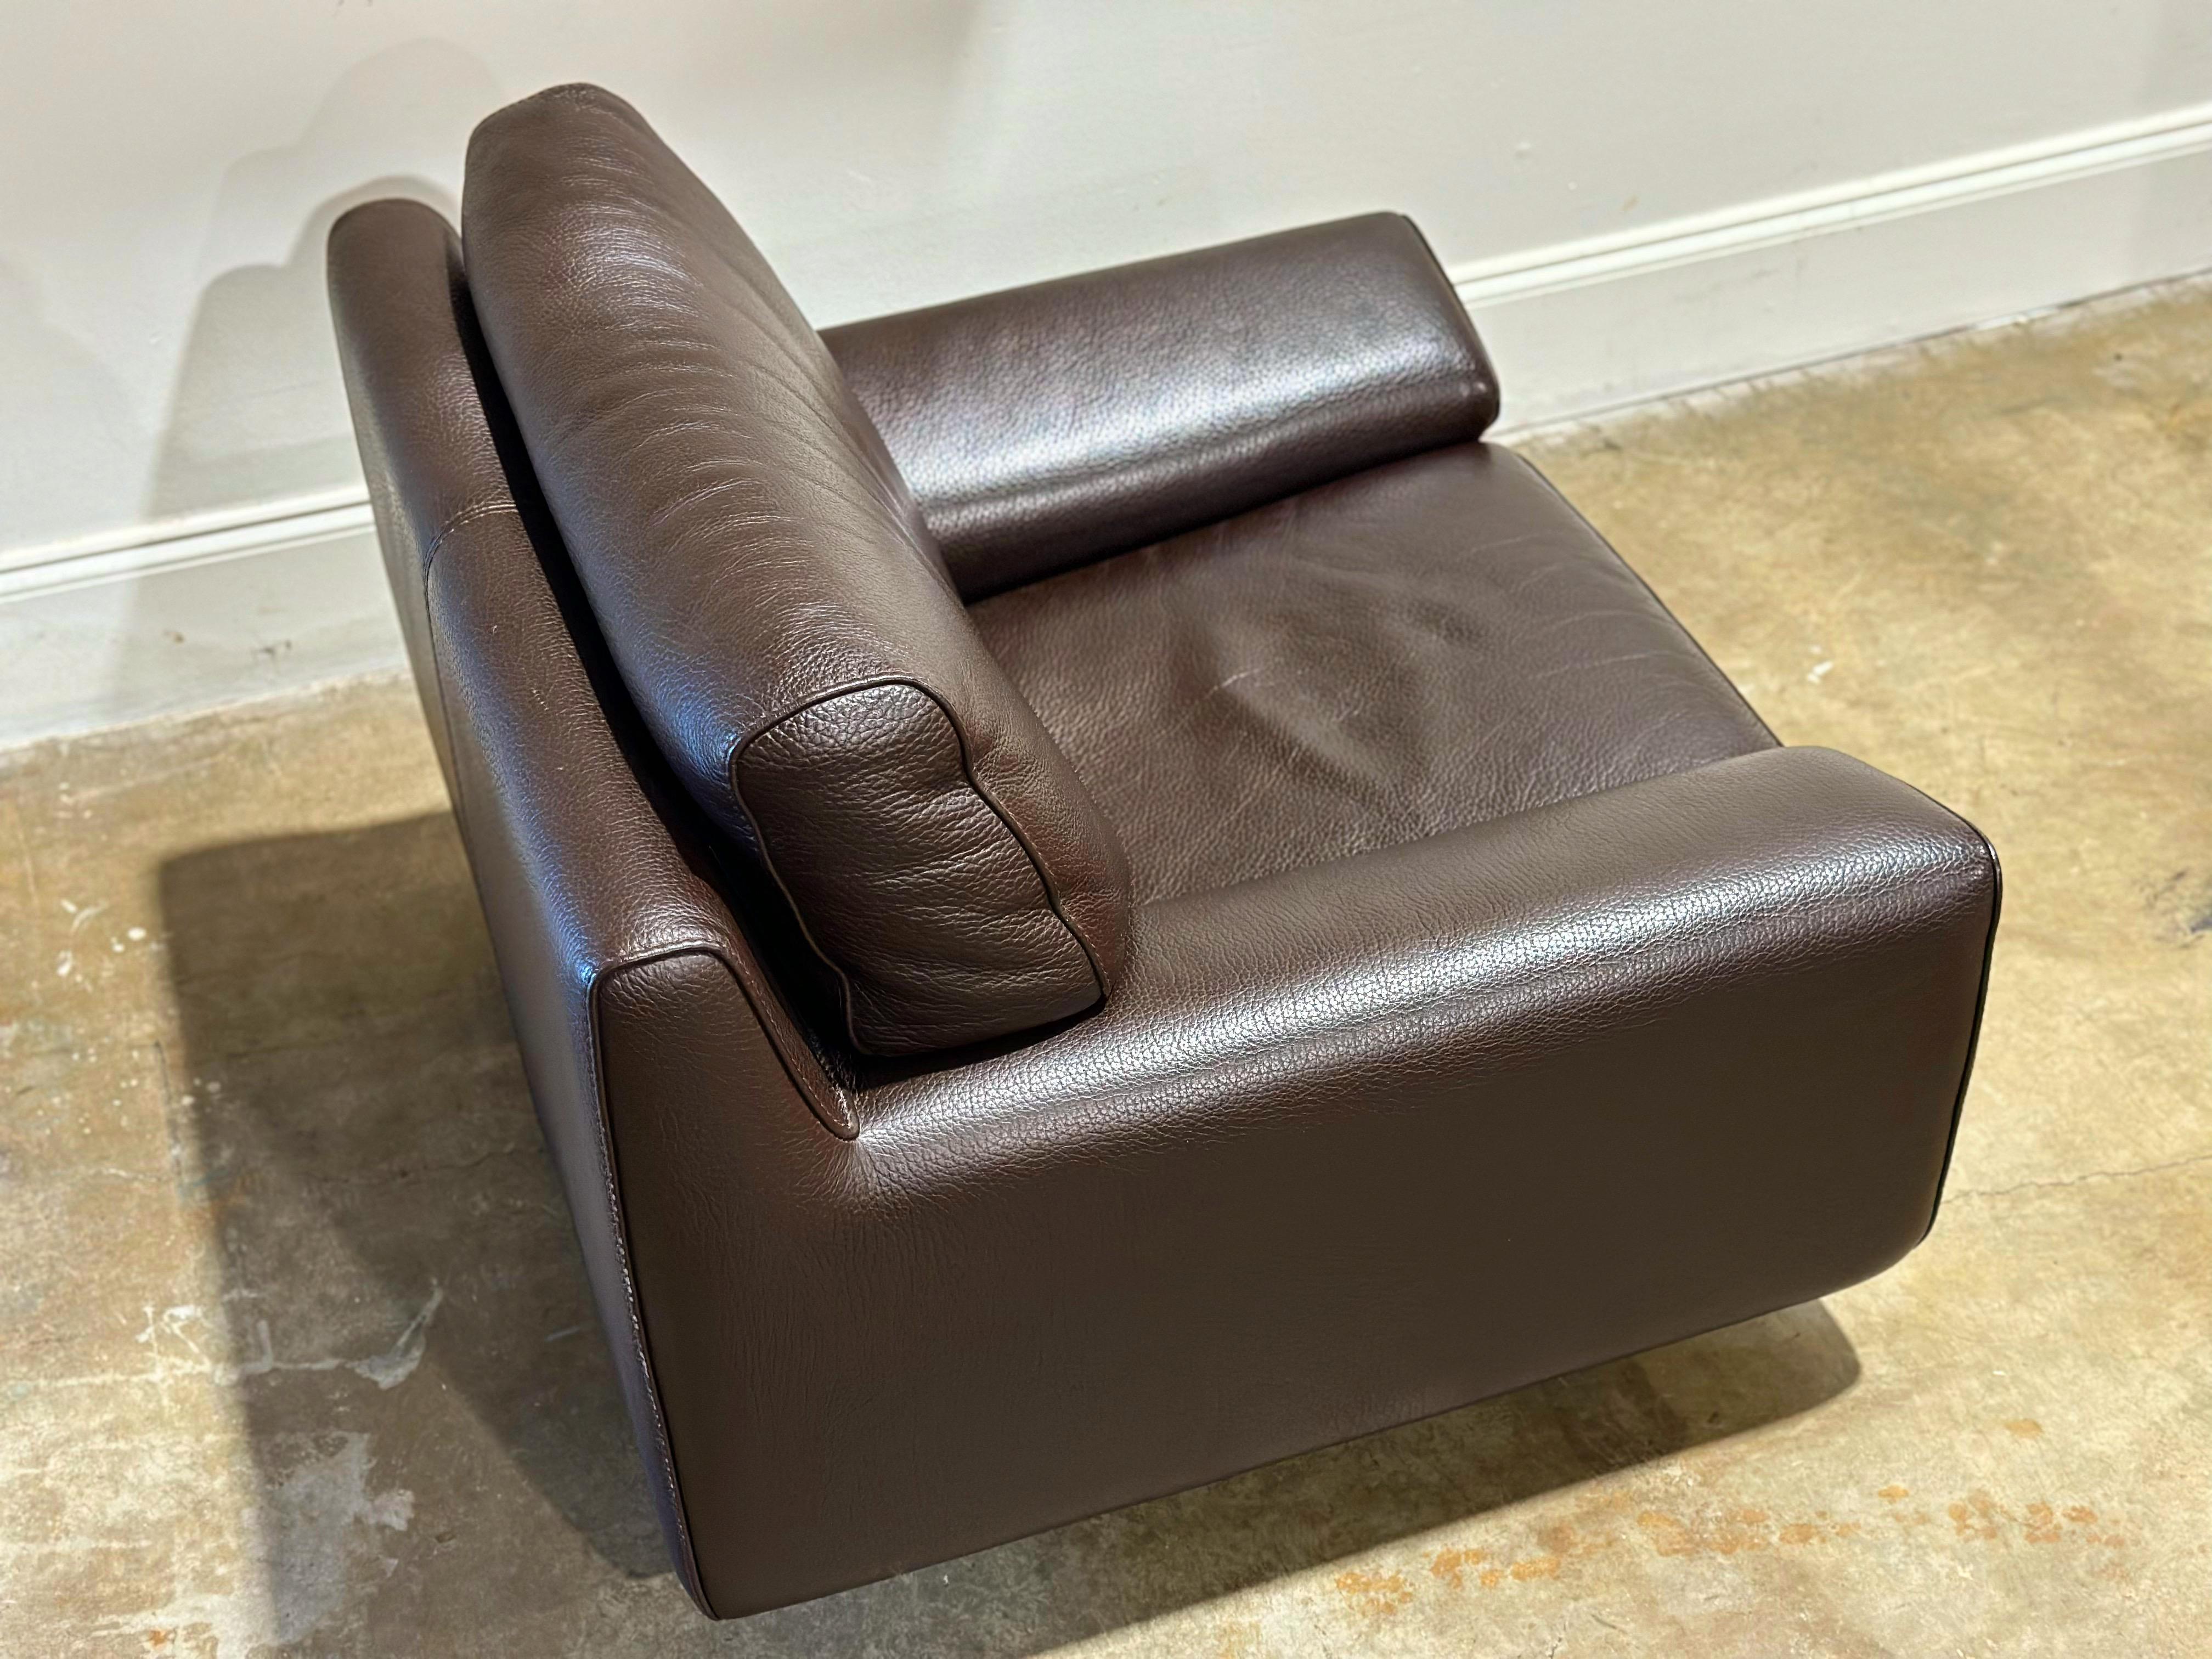 French Vintage Roche Bobois Leather Swivel Lounge Chair - Dark Ox Blood Maroon Brown For Sale